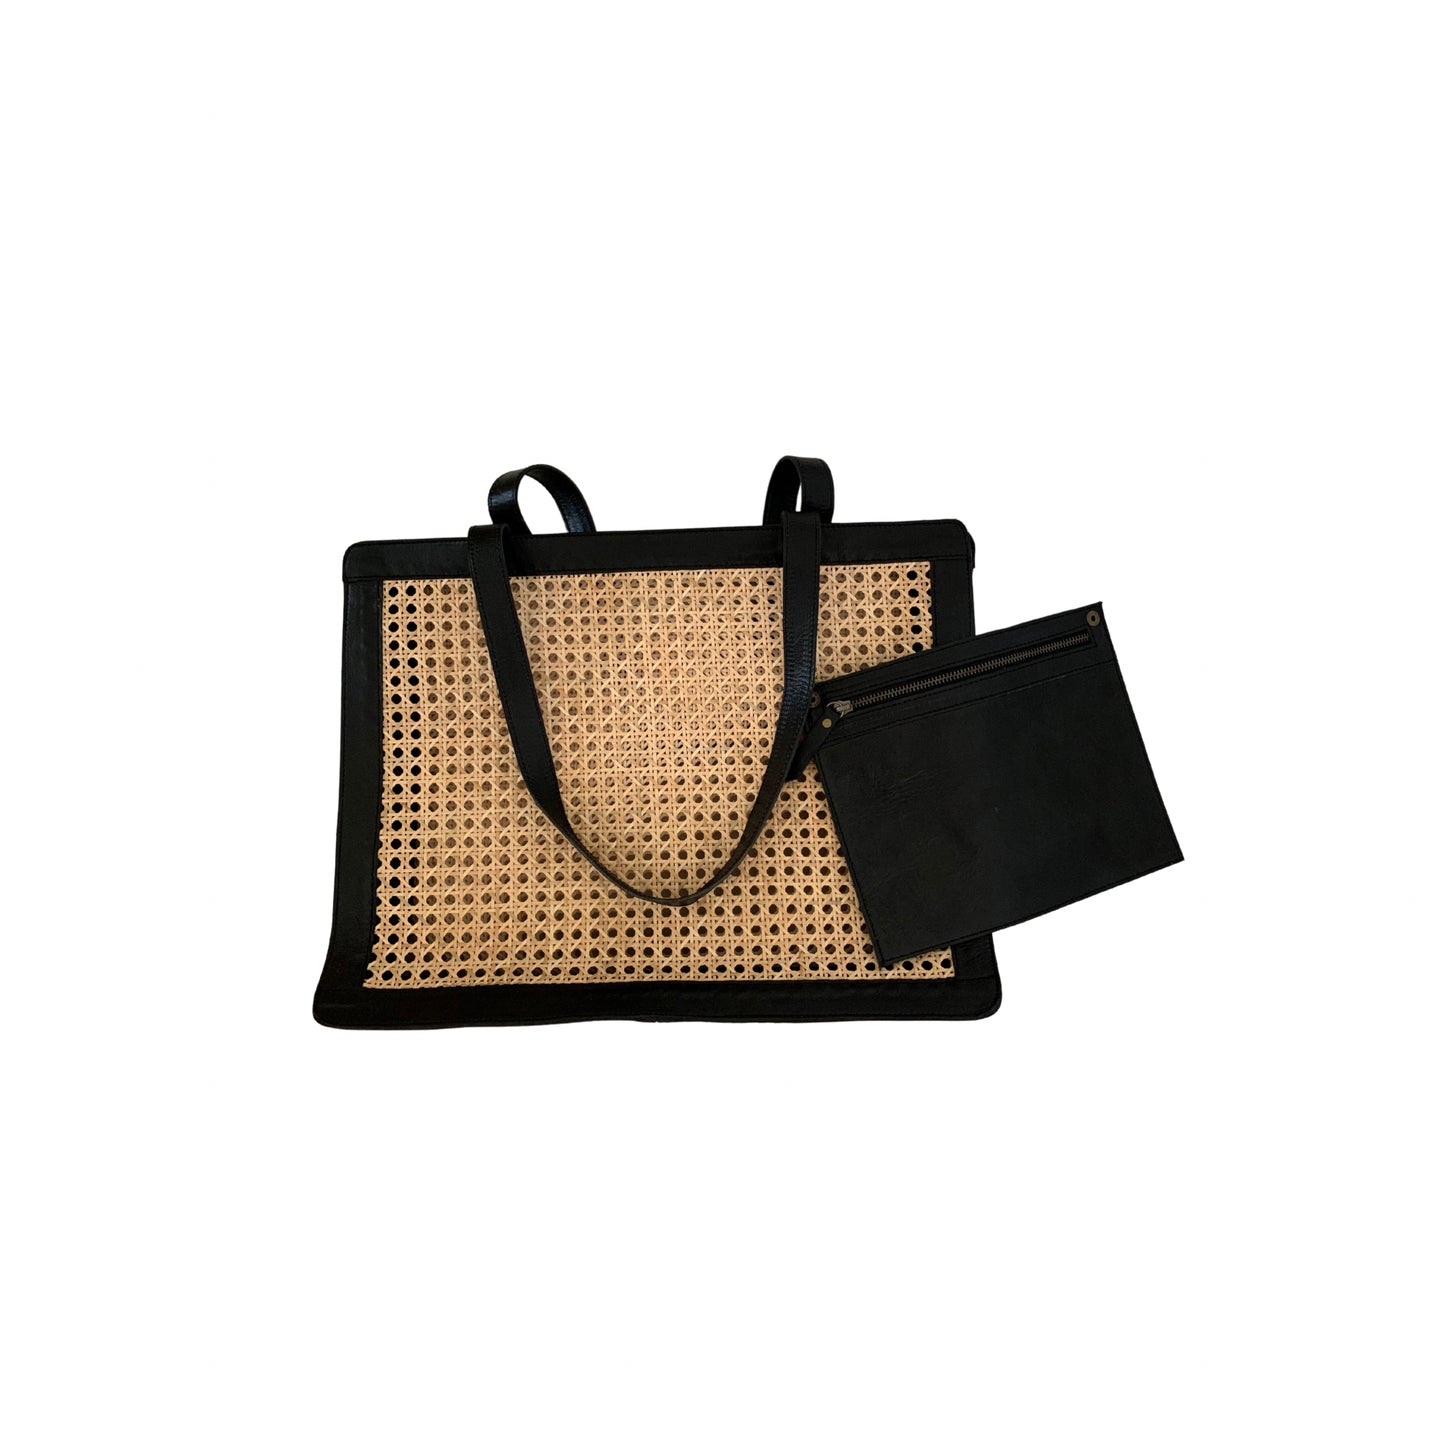 Giselle Oversized Cane and Leather Tote in Black